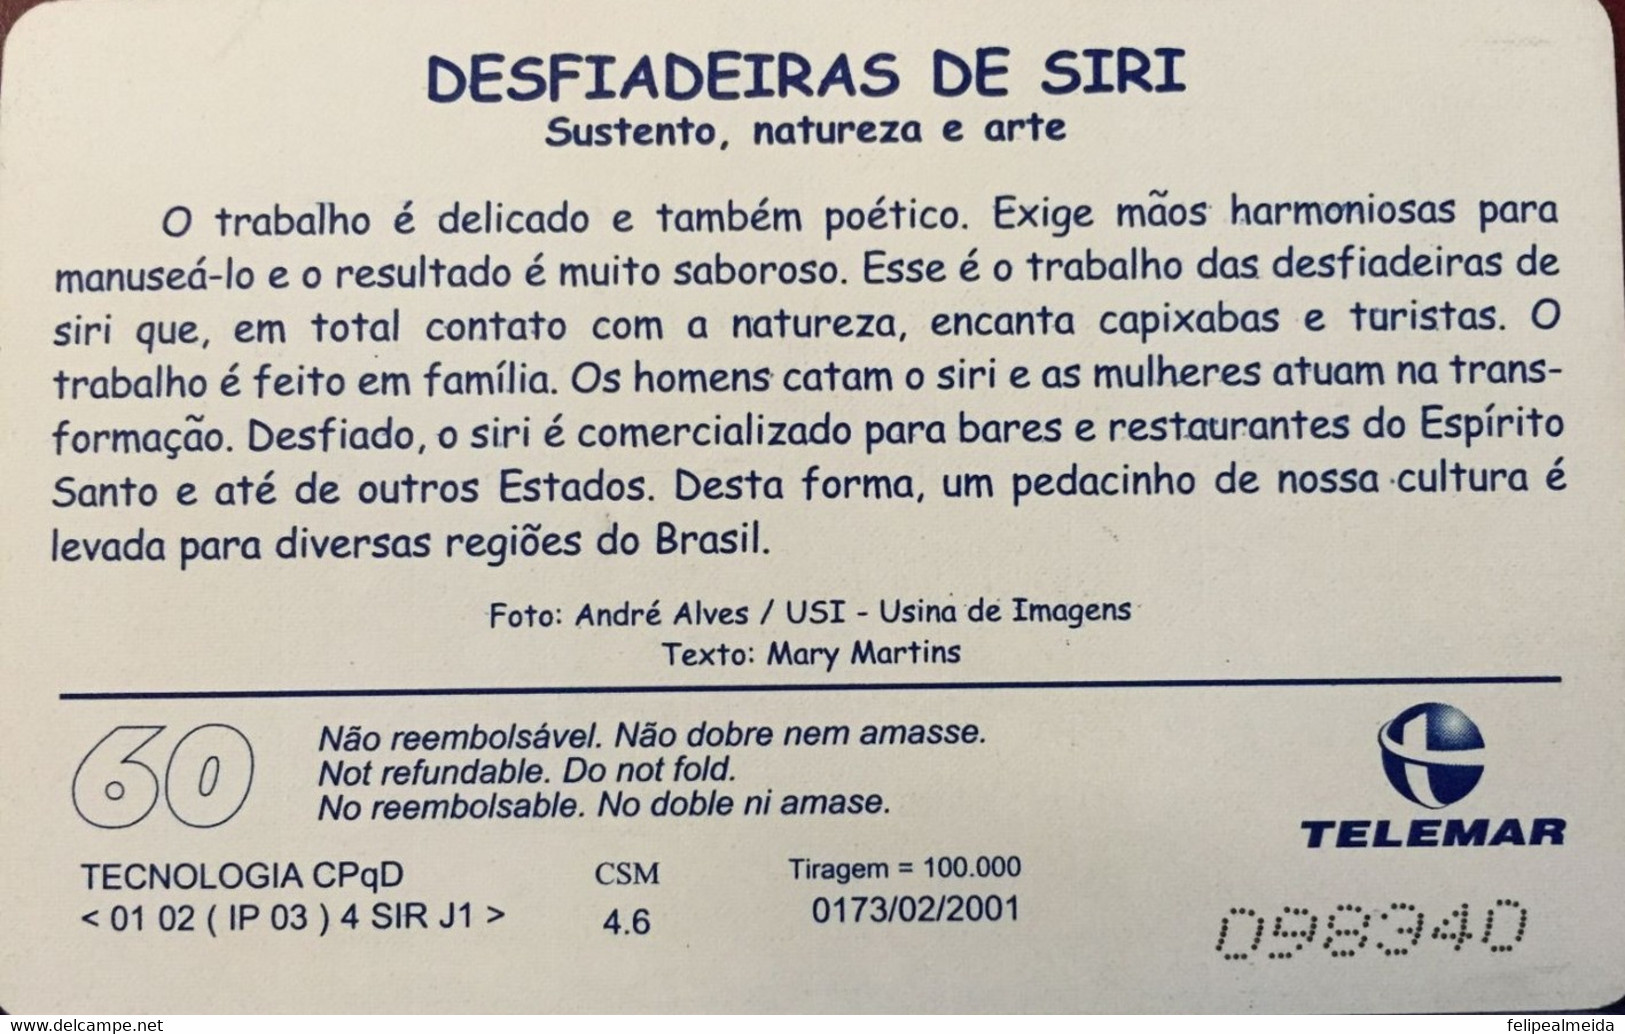 Phone Card Manufactured By Telemar In 2001 - Desfiadeiras De Siri - Sustenance, Nature And Art - Food